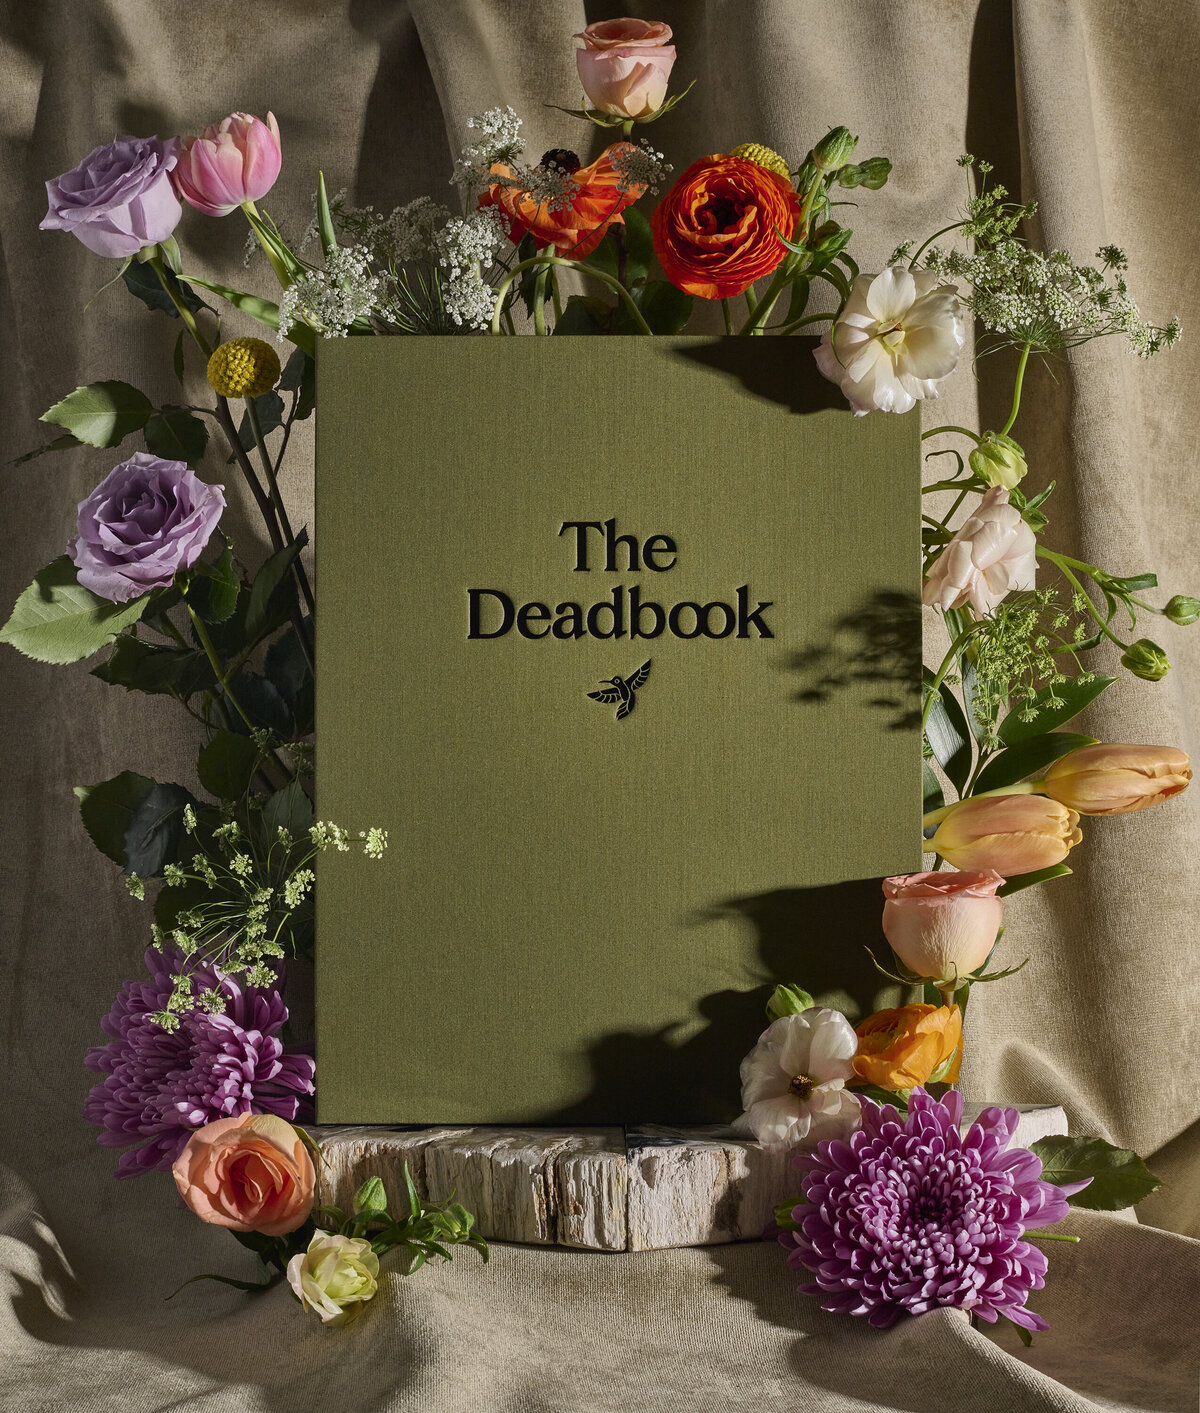 los-angeles-product-photographer-lindsay-kreighbaum-the-deadbook-floral-book-photography-8